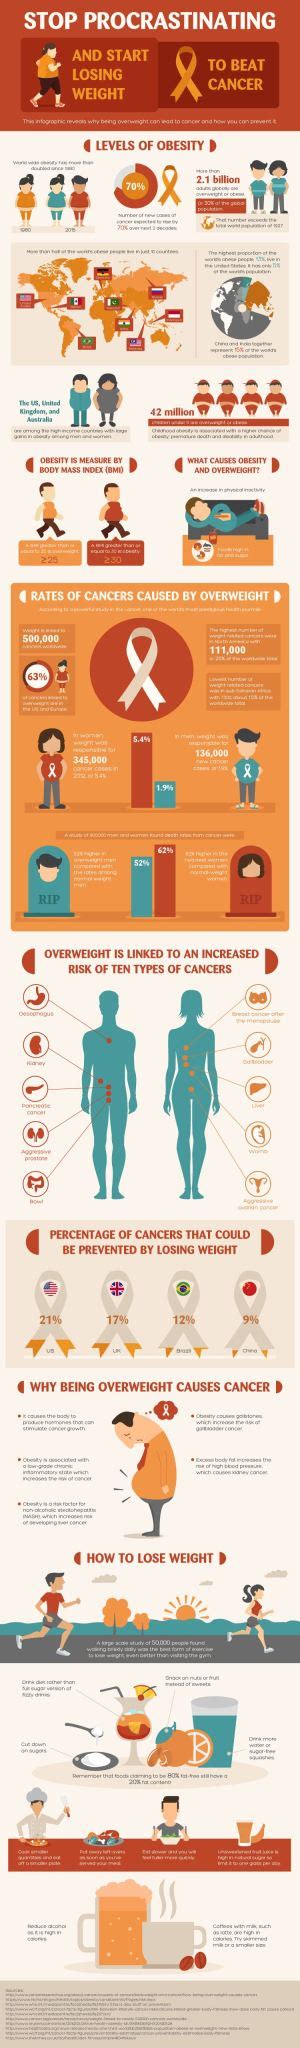 Understand How Obesity Can Cause Cancer